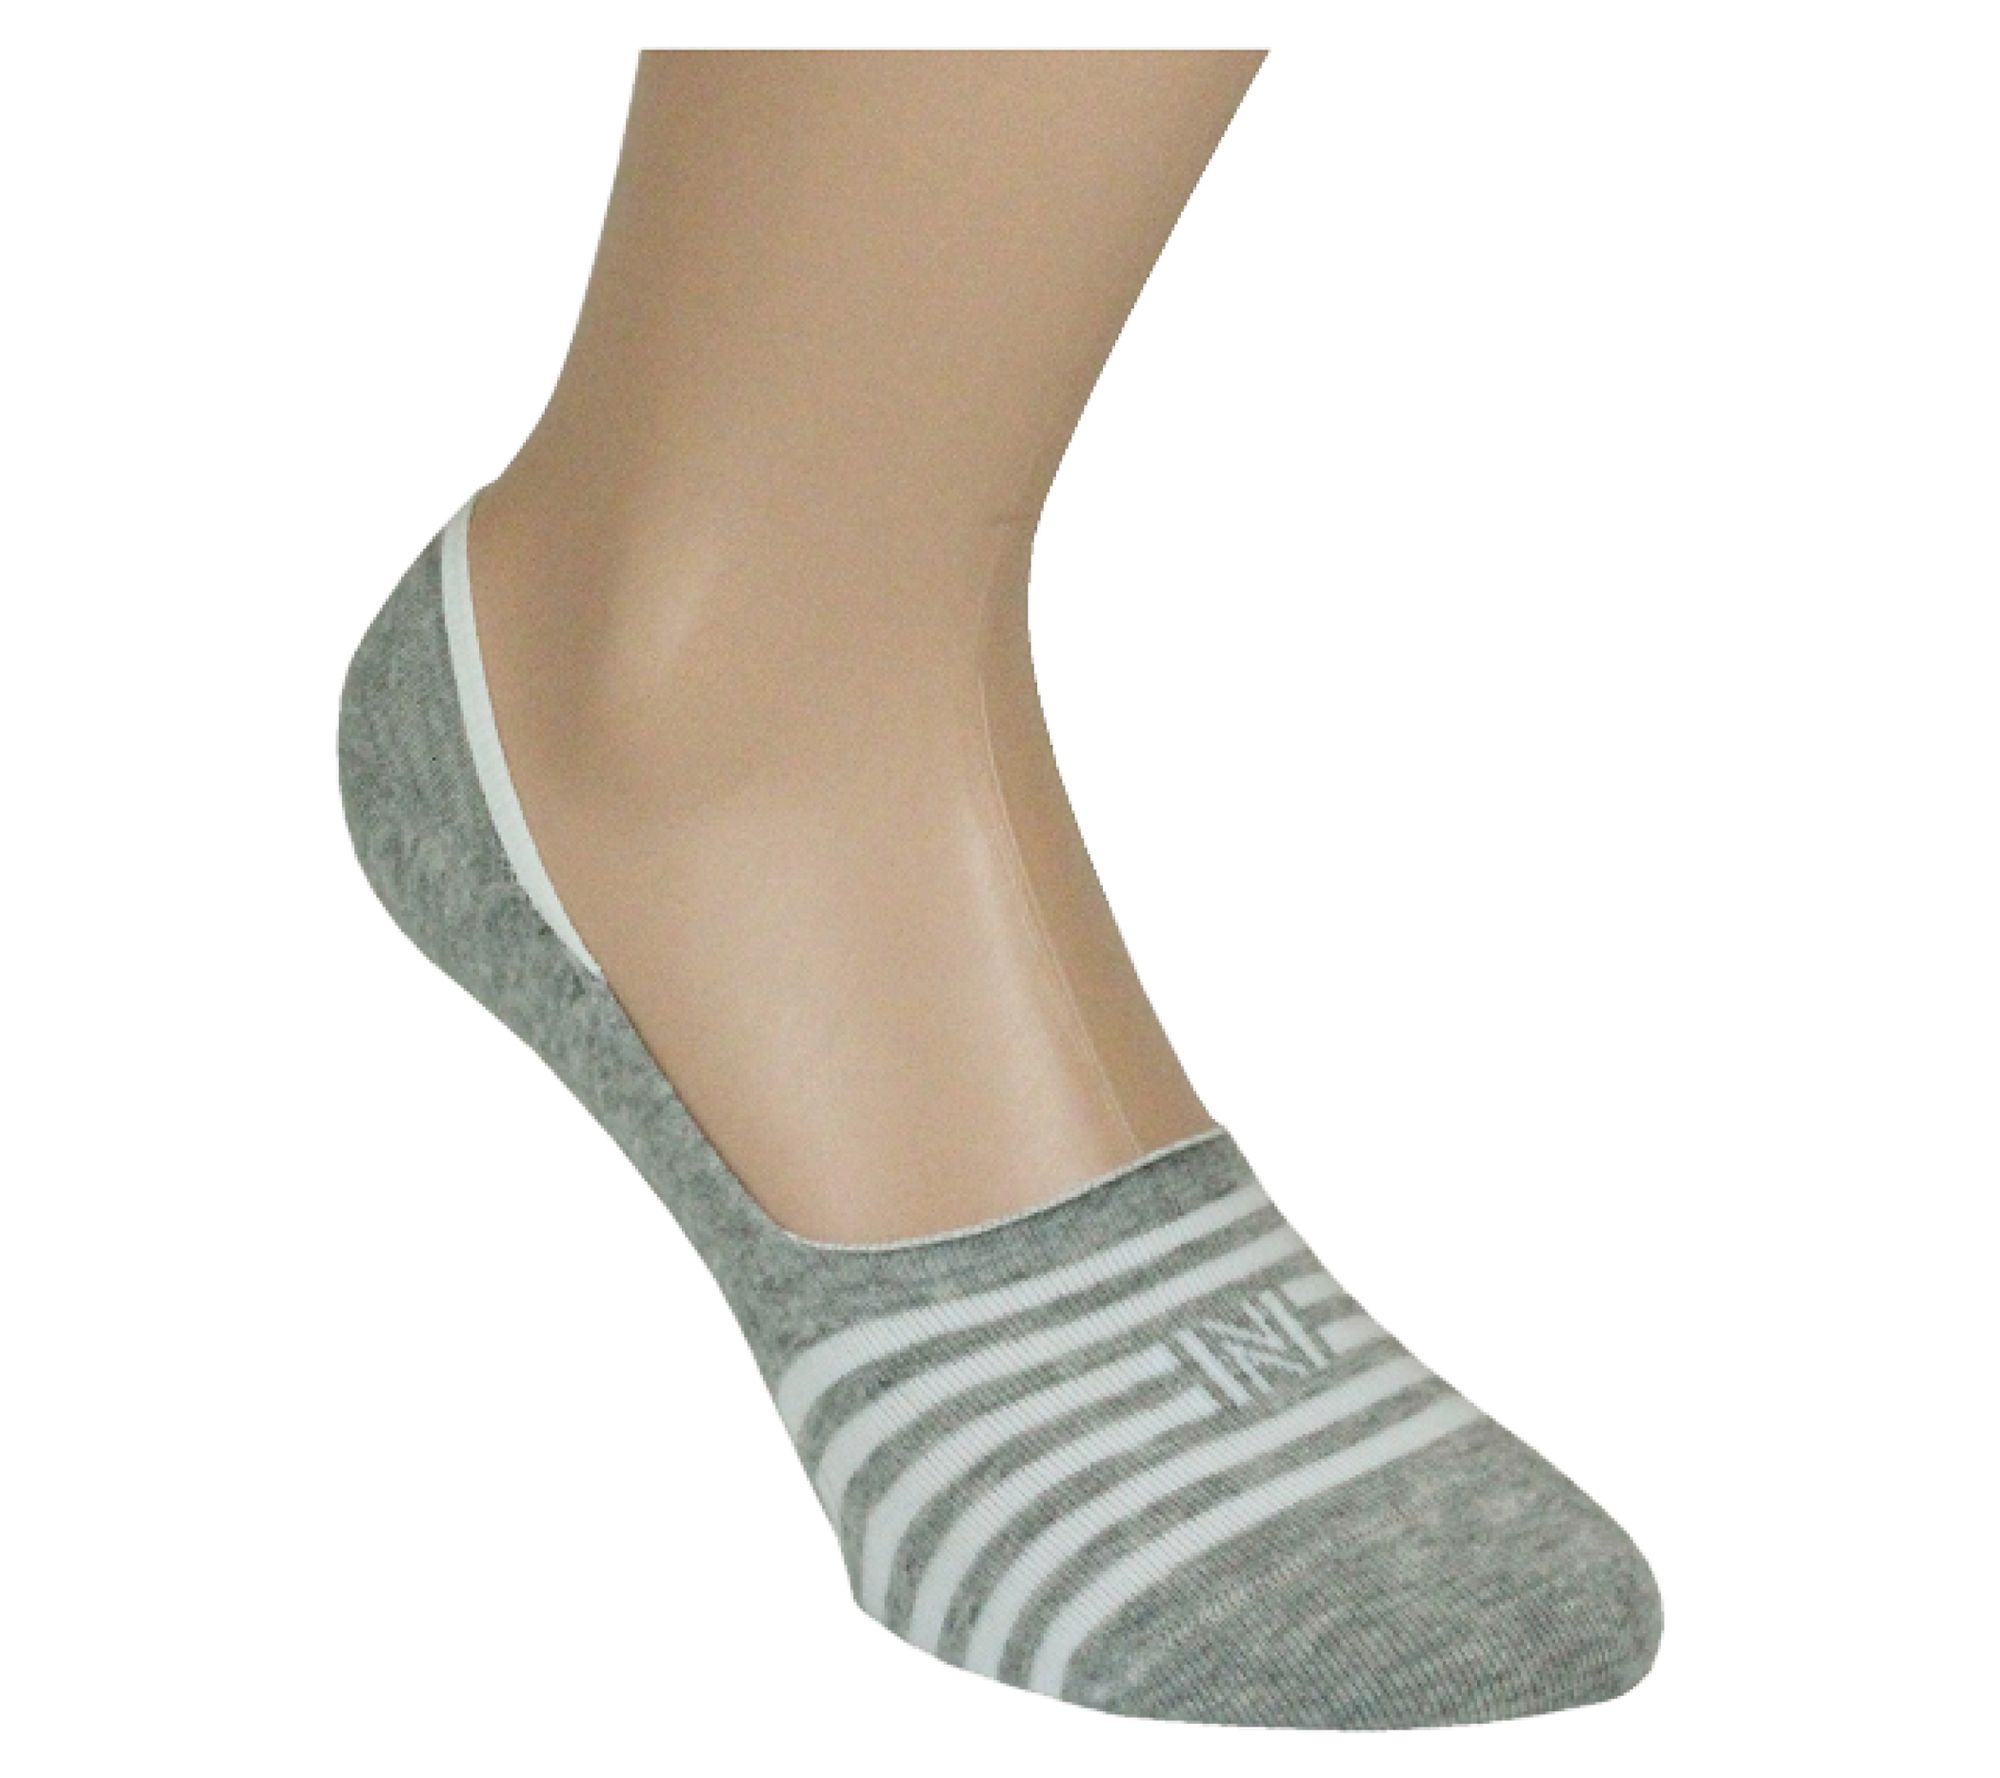 Norfolk Set of 4 Invisible Men's Liner Socks with Heel Grips - QVC.com